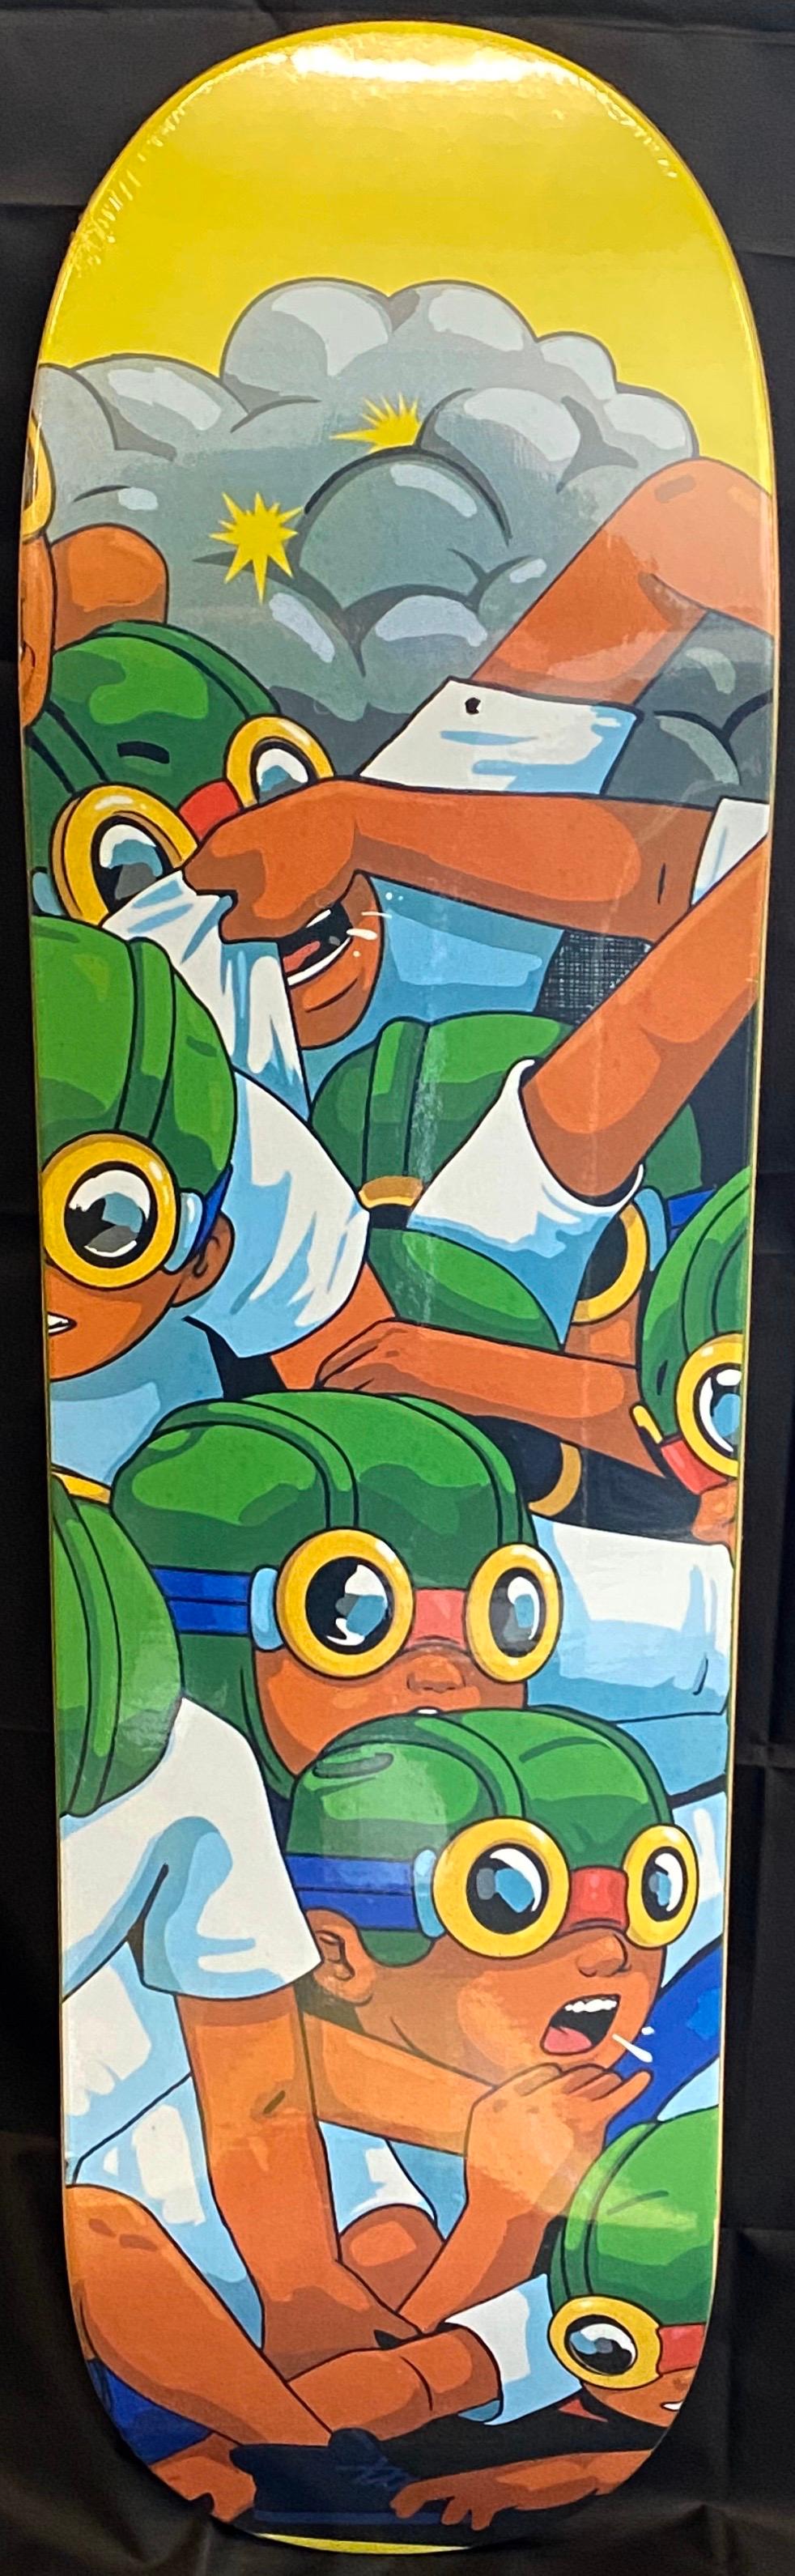 Hebru Brantley Fly Boy Skateboard Deck:

Medium: Silkscreen on maple wood skateboard deck. 
Approximate Dimensions: 8.25 x 32 inches. 
Excellent condition (in original shrink wrap). 
From a sold out limited series of unknown.
Published by Hebru